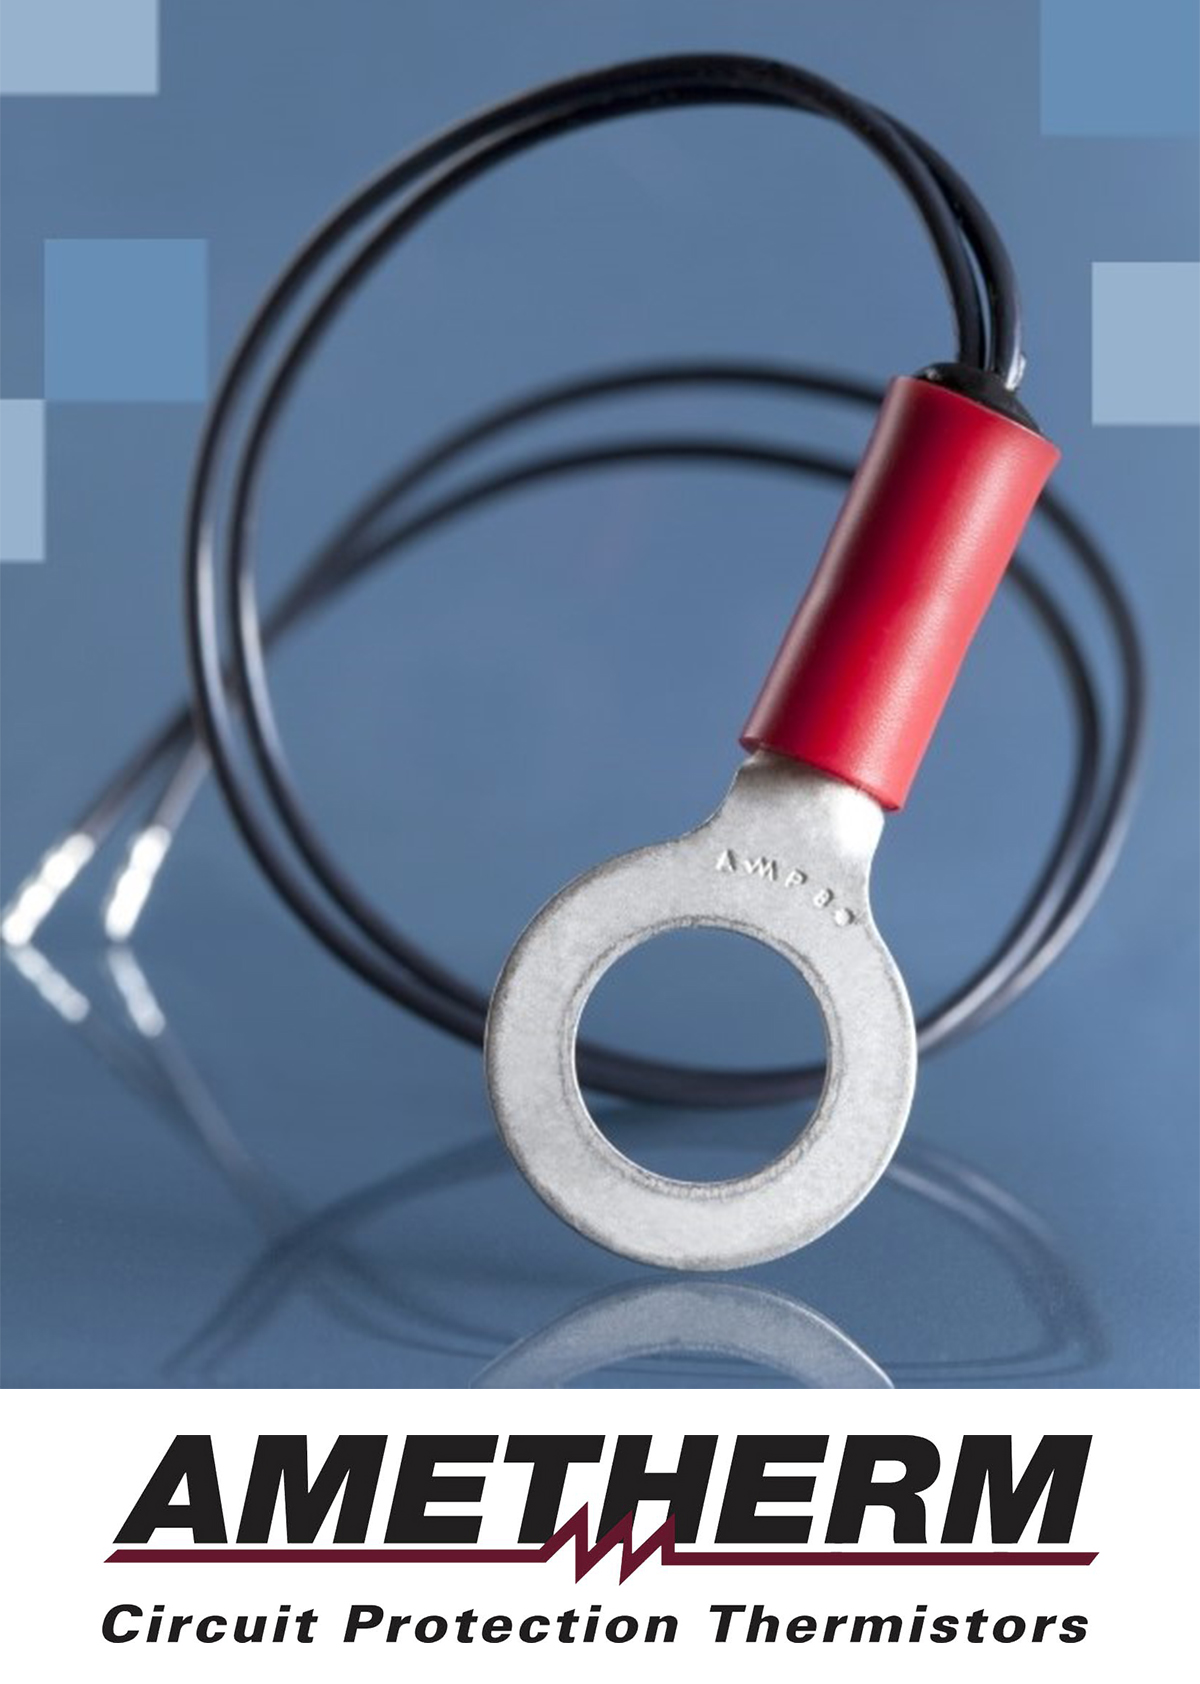 NTC Thermistor Probe Assembly With Ring Lug Designed for Easy and Secure Li-Ion Battery Terminal Mounting